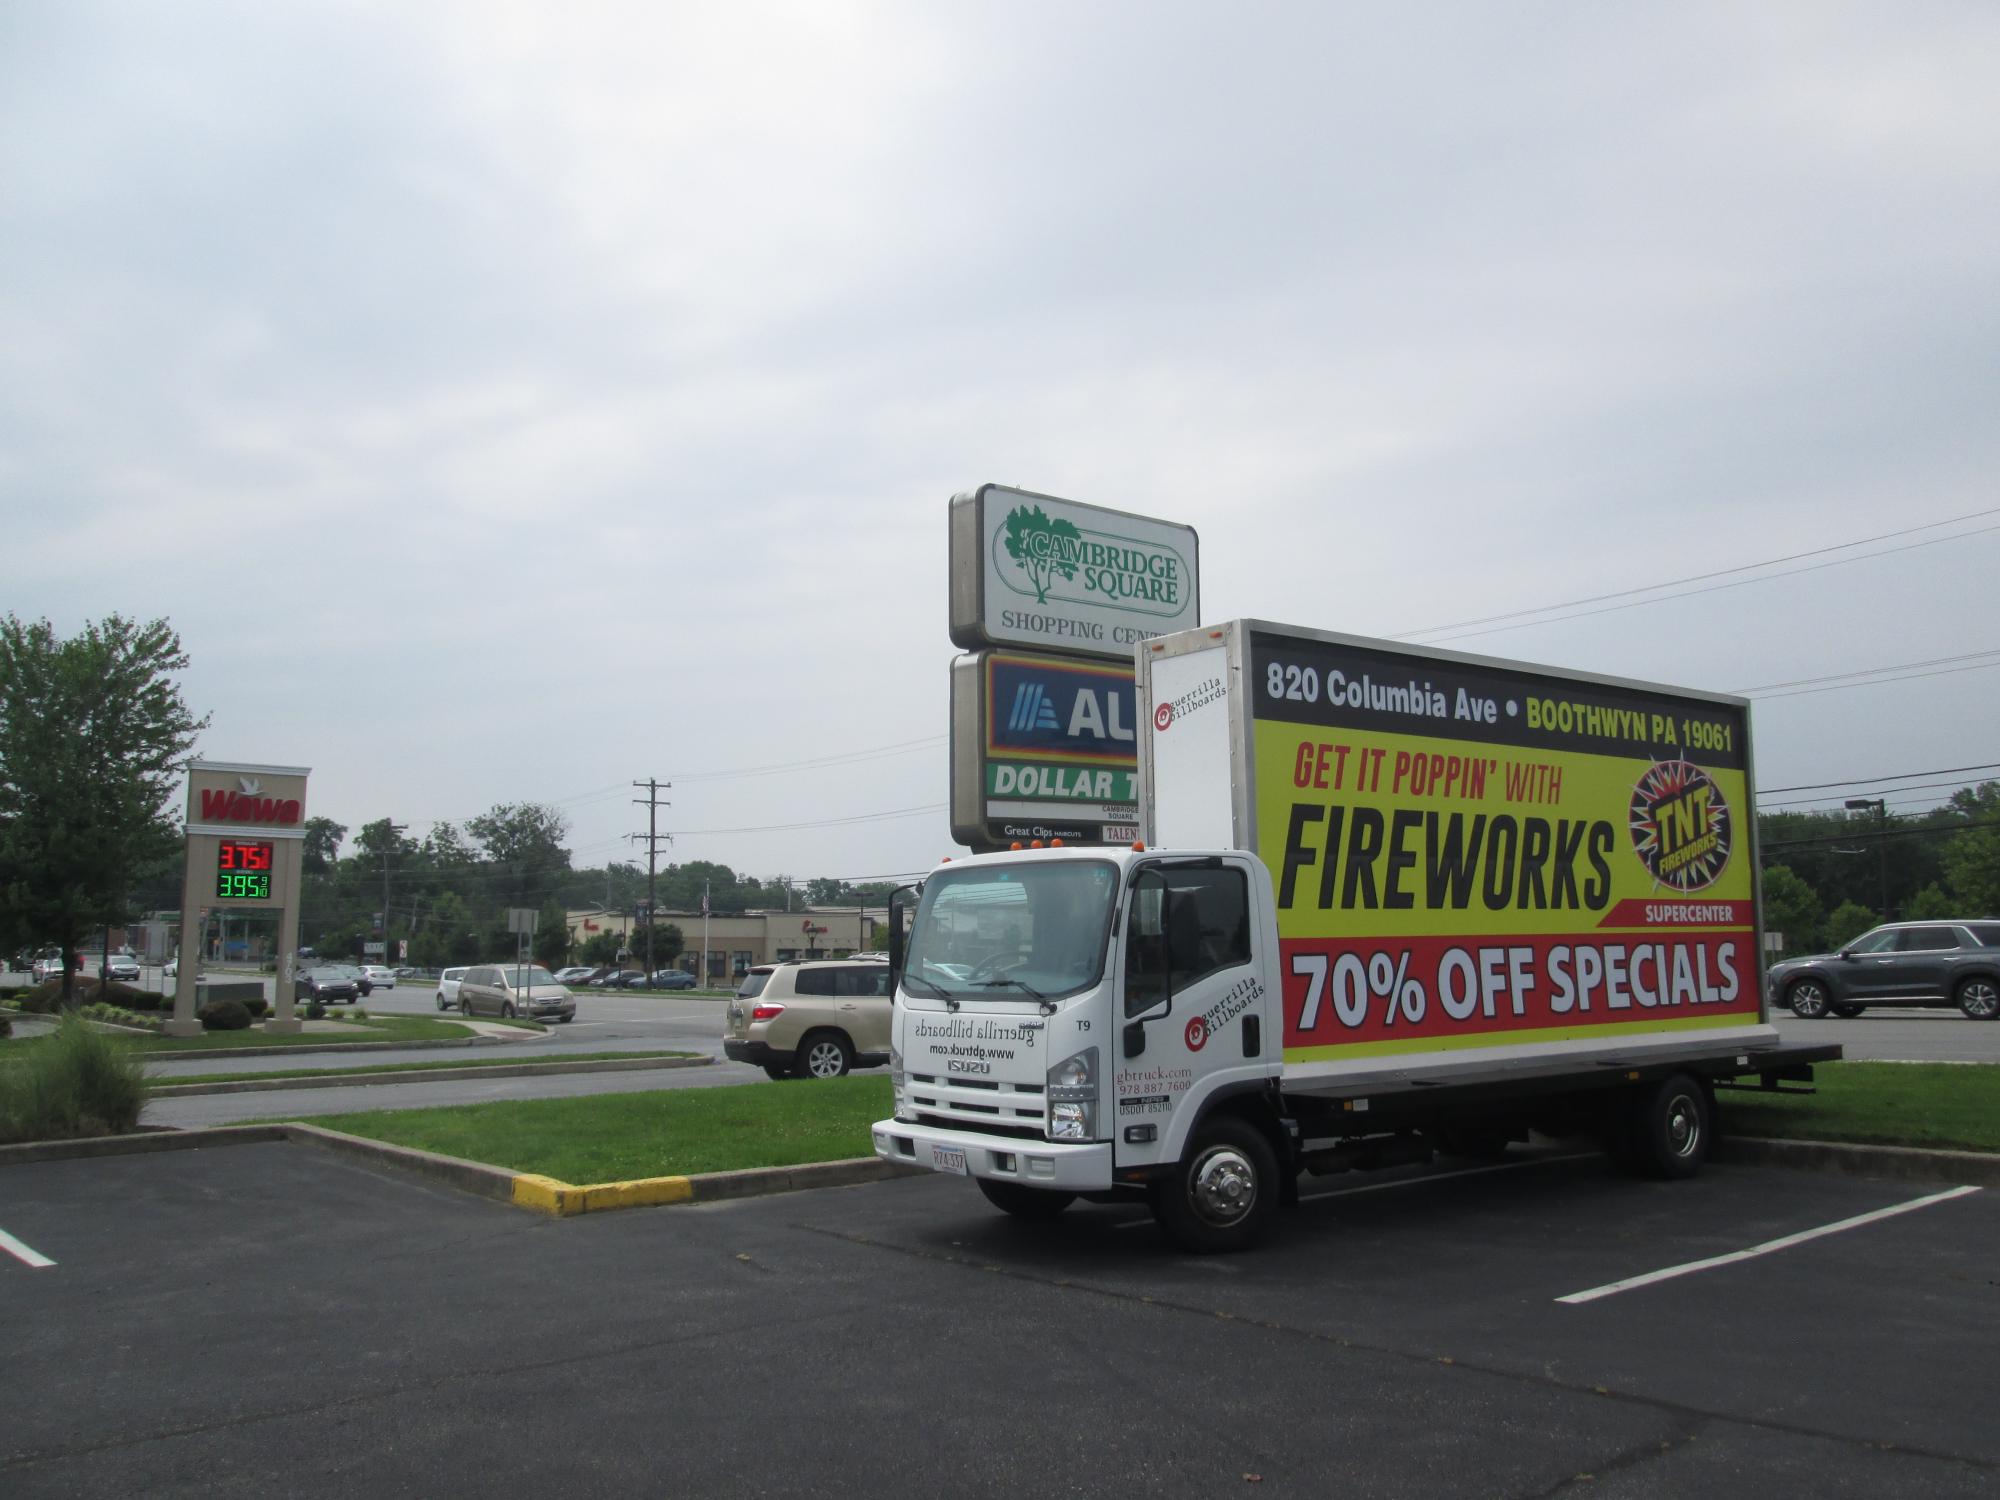 Mobile billboard truck parked at Cambridge Square in Brookhaven, PA.